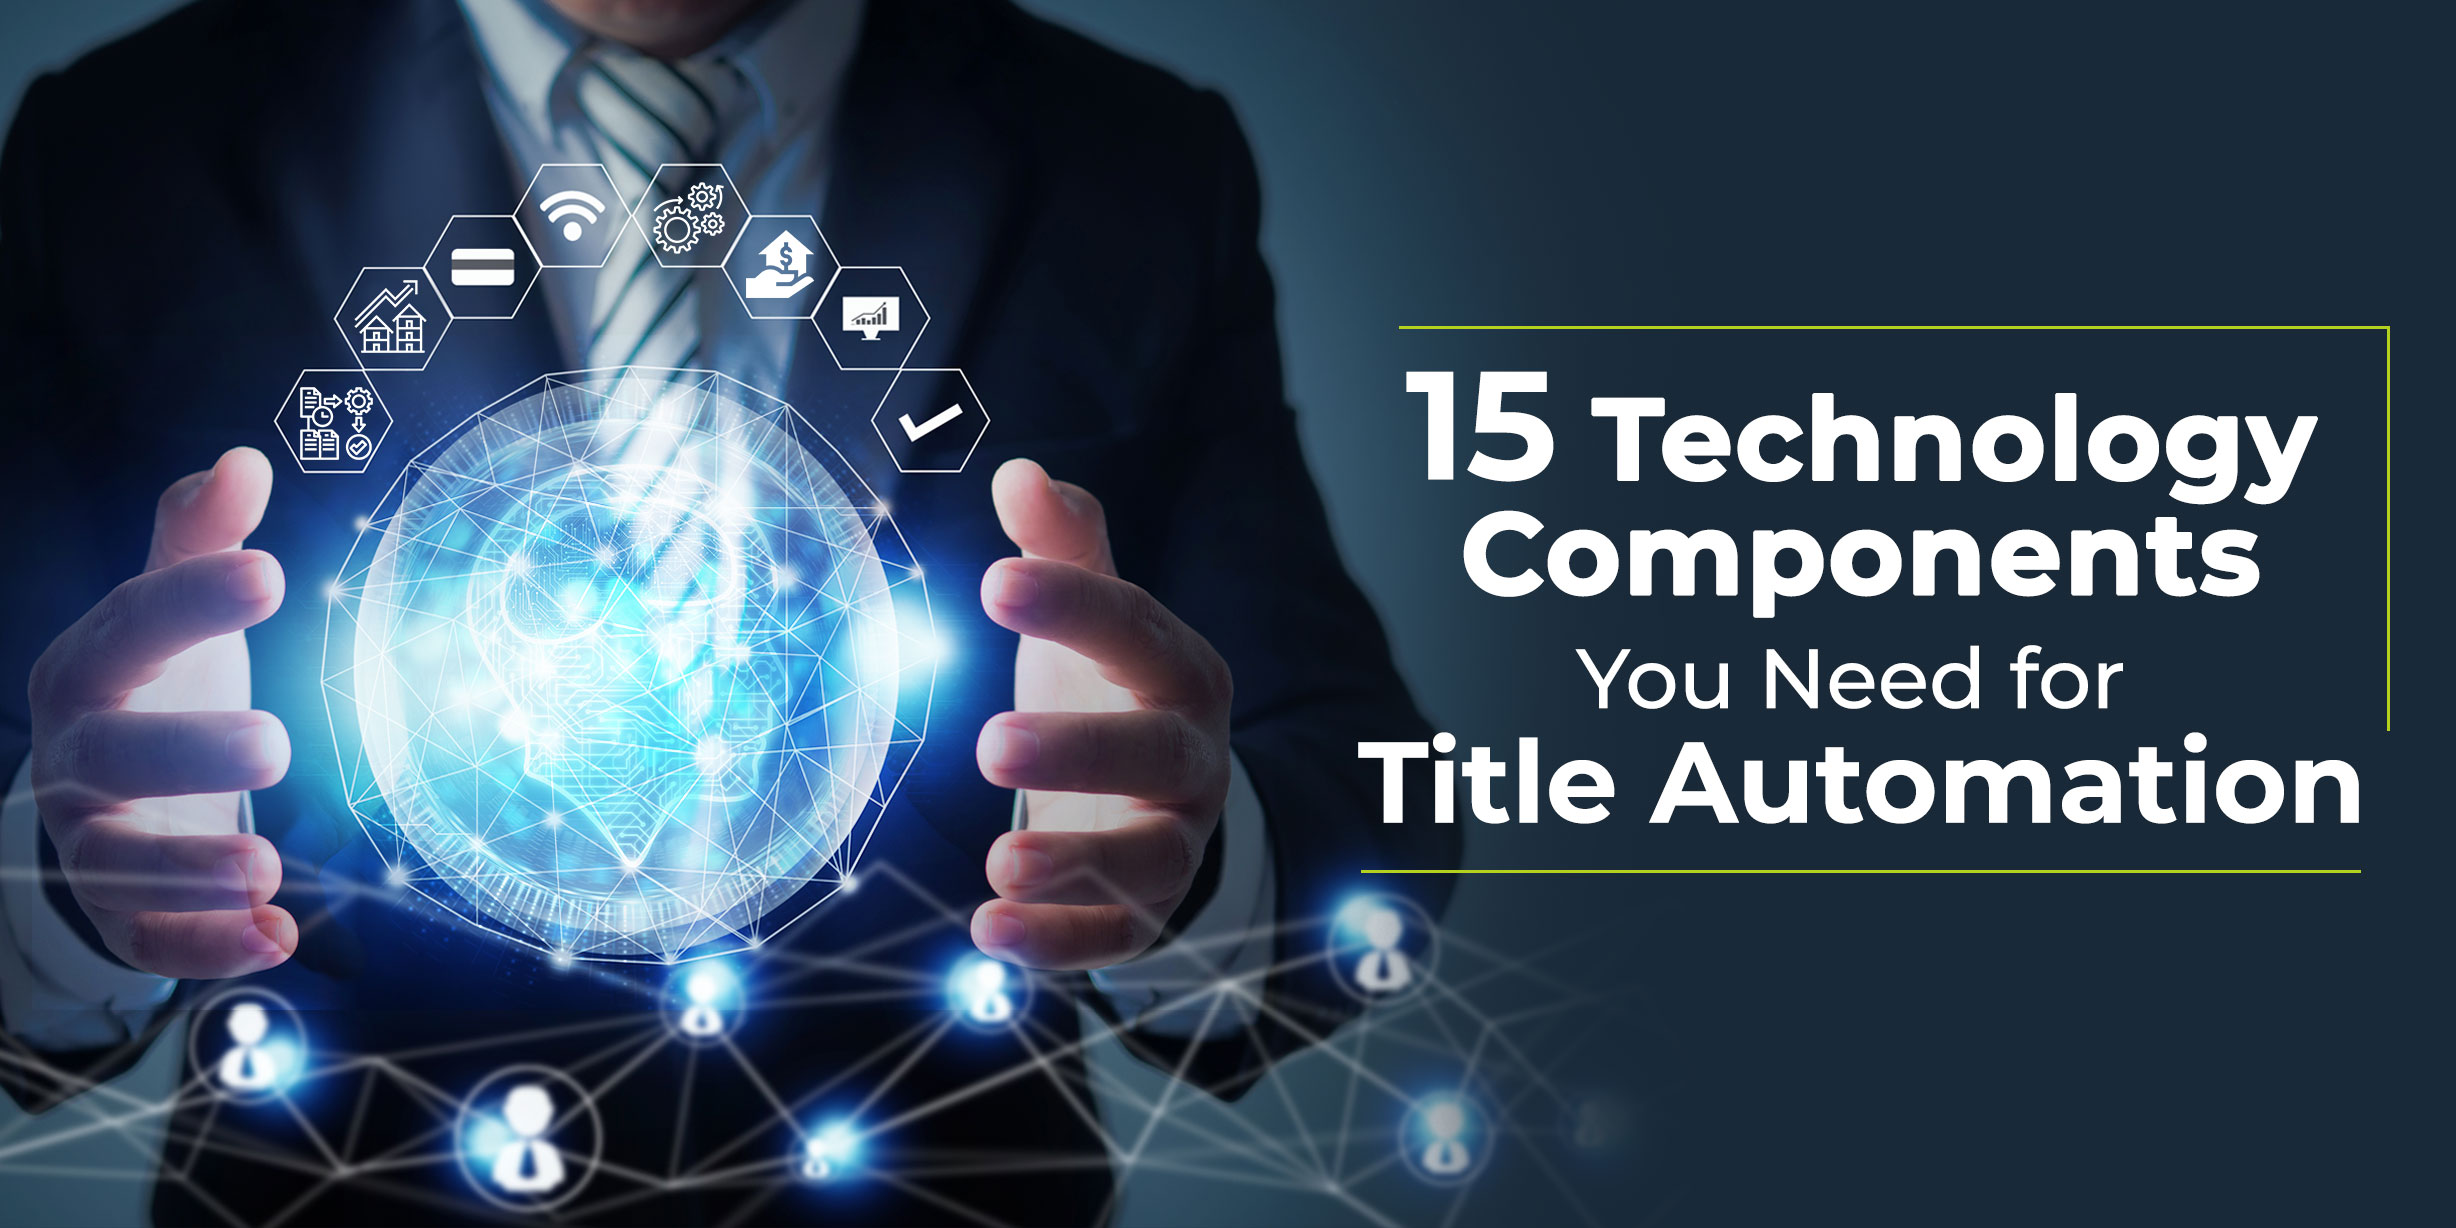 15 Technology Components You Need for Title Automation